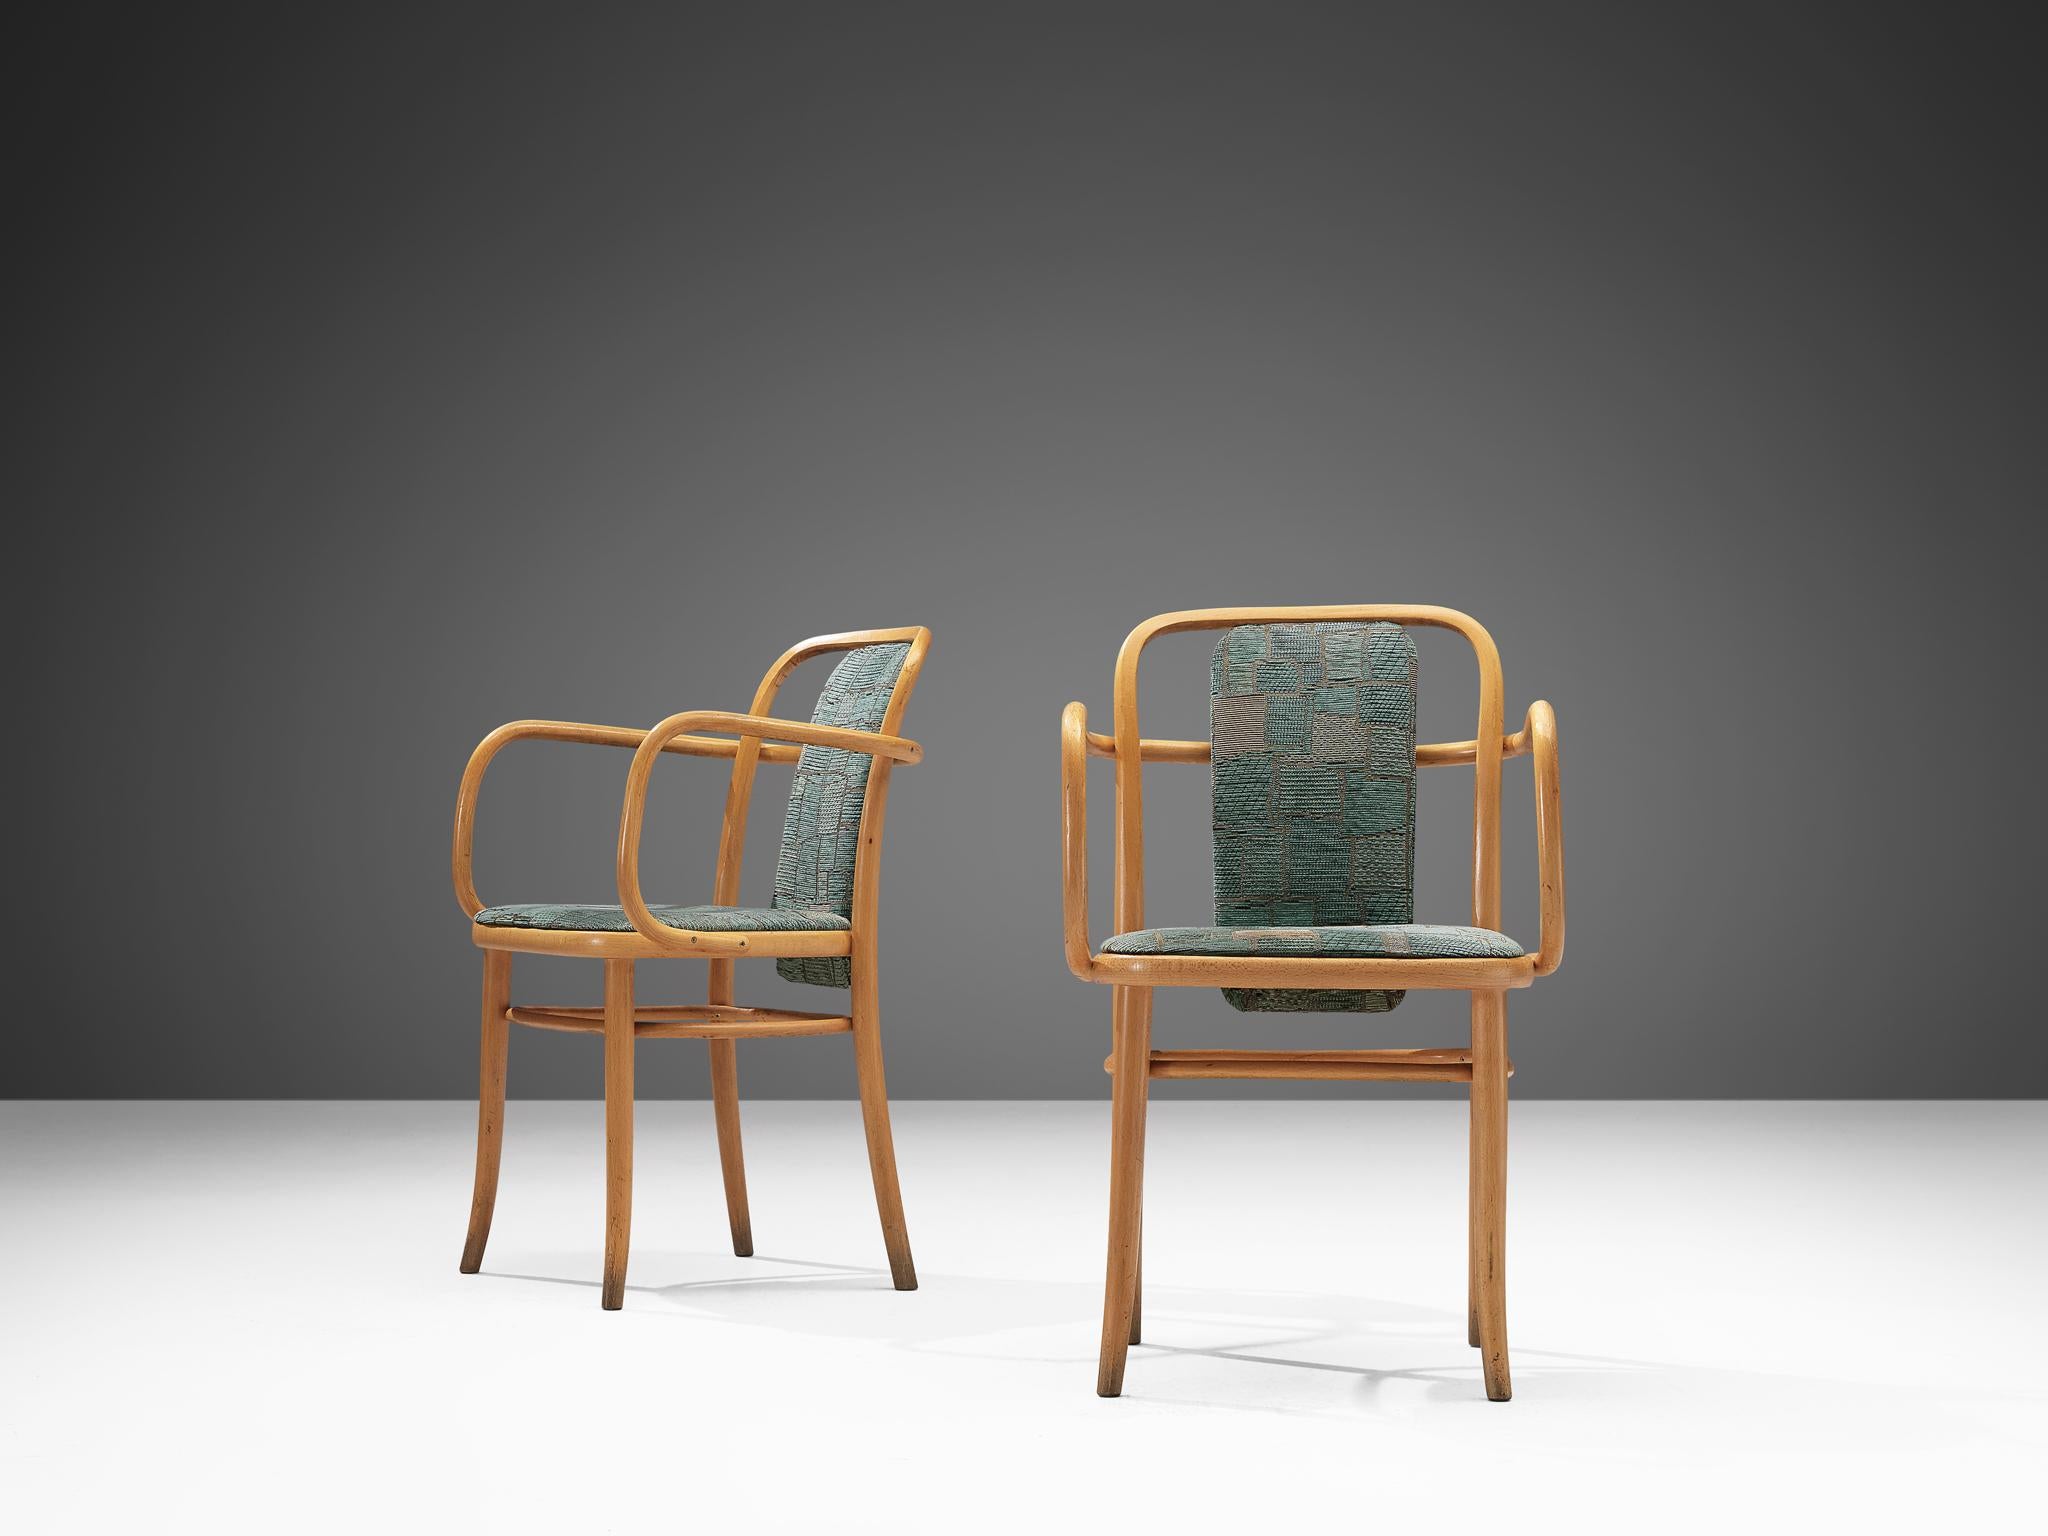 Dining chairs, bentwood and textured aquamarine upholstery, Europe, 1960s.
 
Pair of elegant armchairs in bentwood. The bentwood armrests have sinuous lines, flowing across the open backrests. With the upholstered backrest and seating the chairs